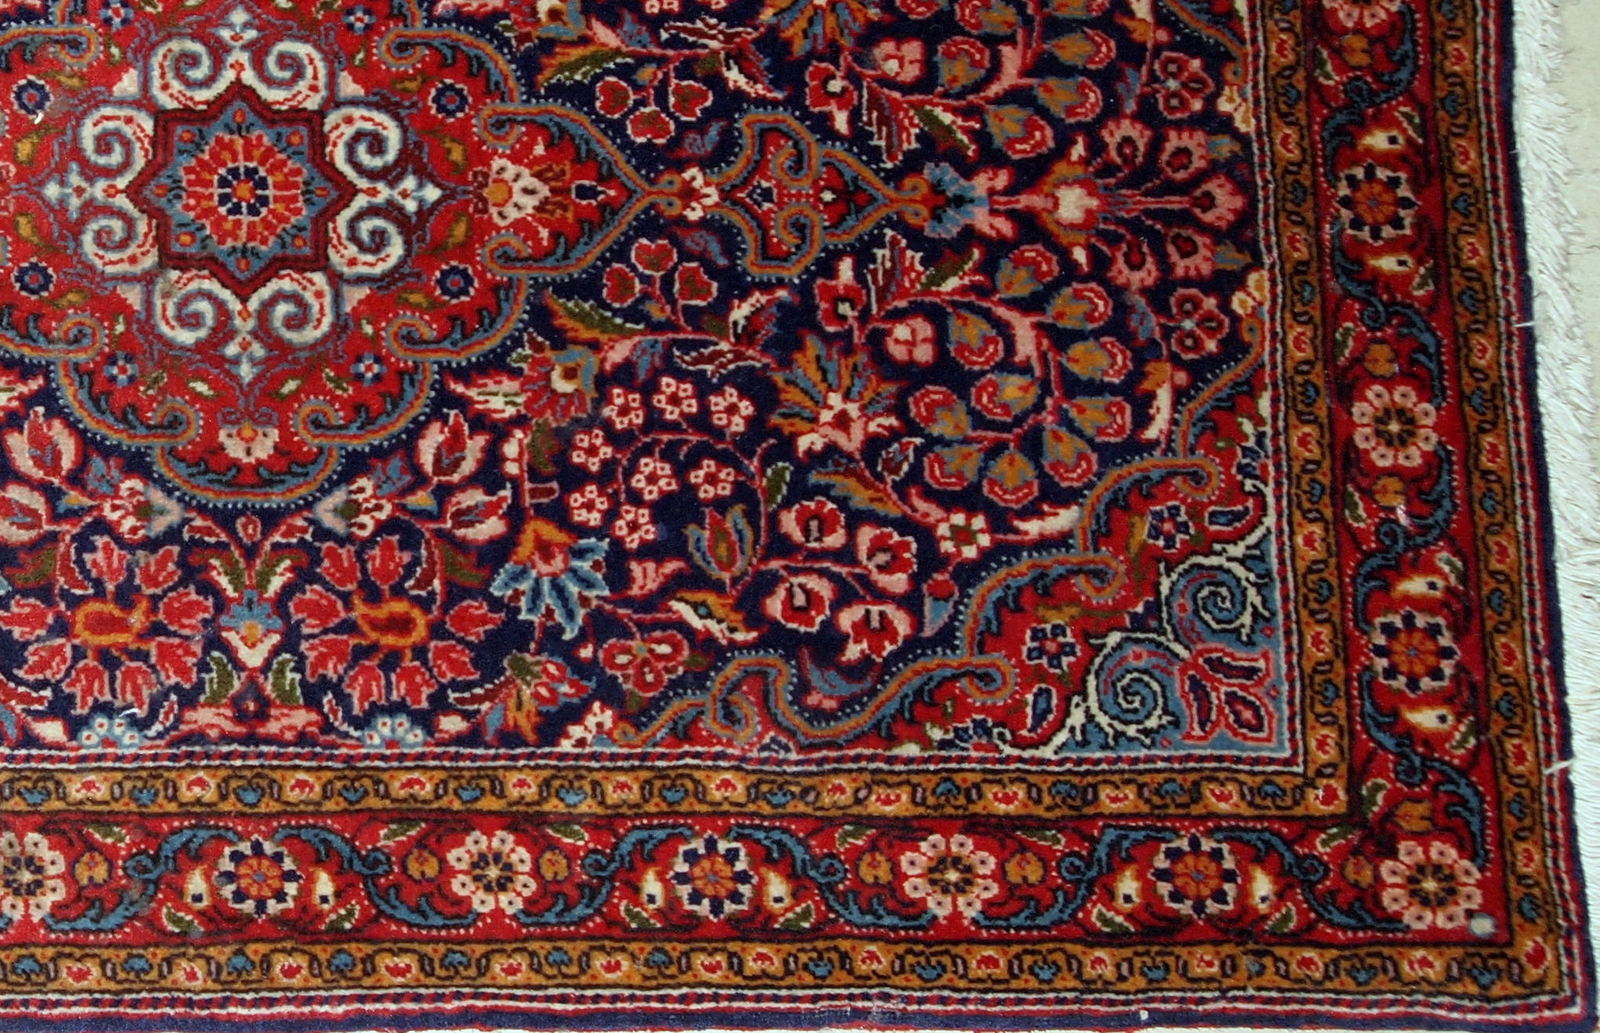 Handmade antique Persian Kazvin rug in original good condition. The rug is from the beginning of 20th century.